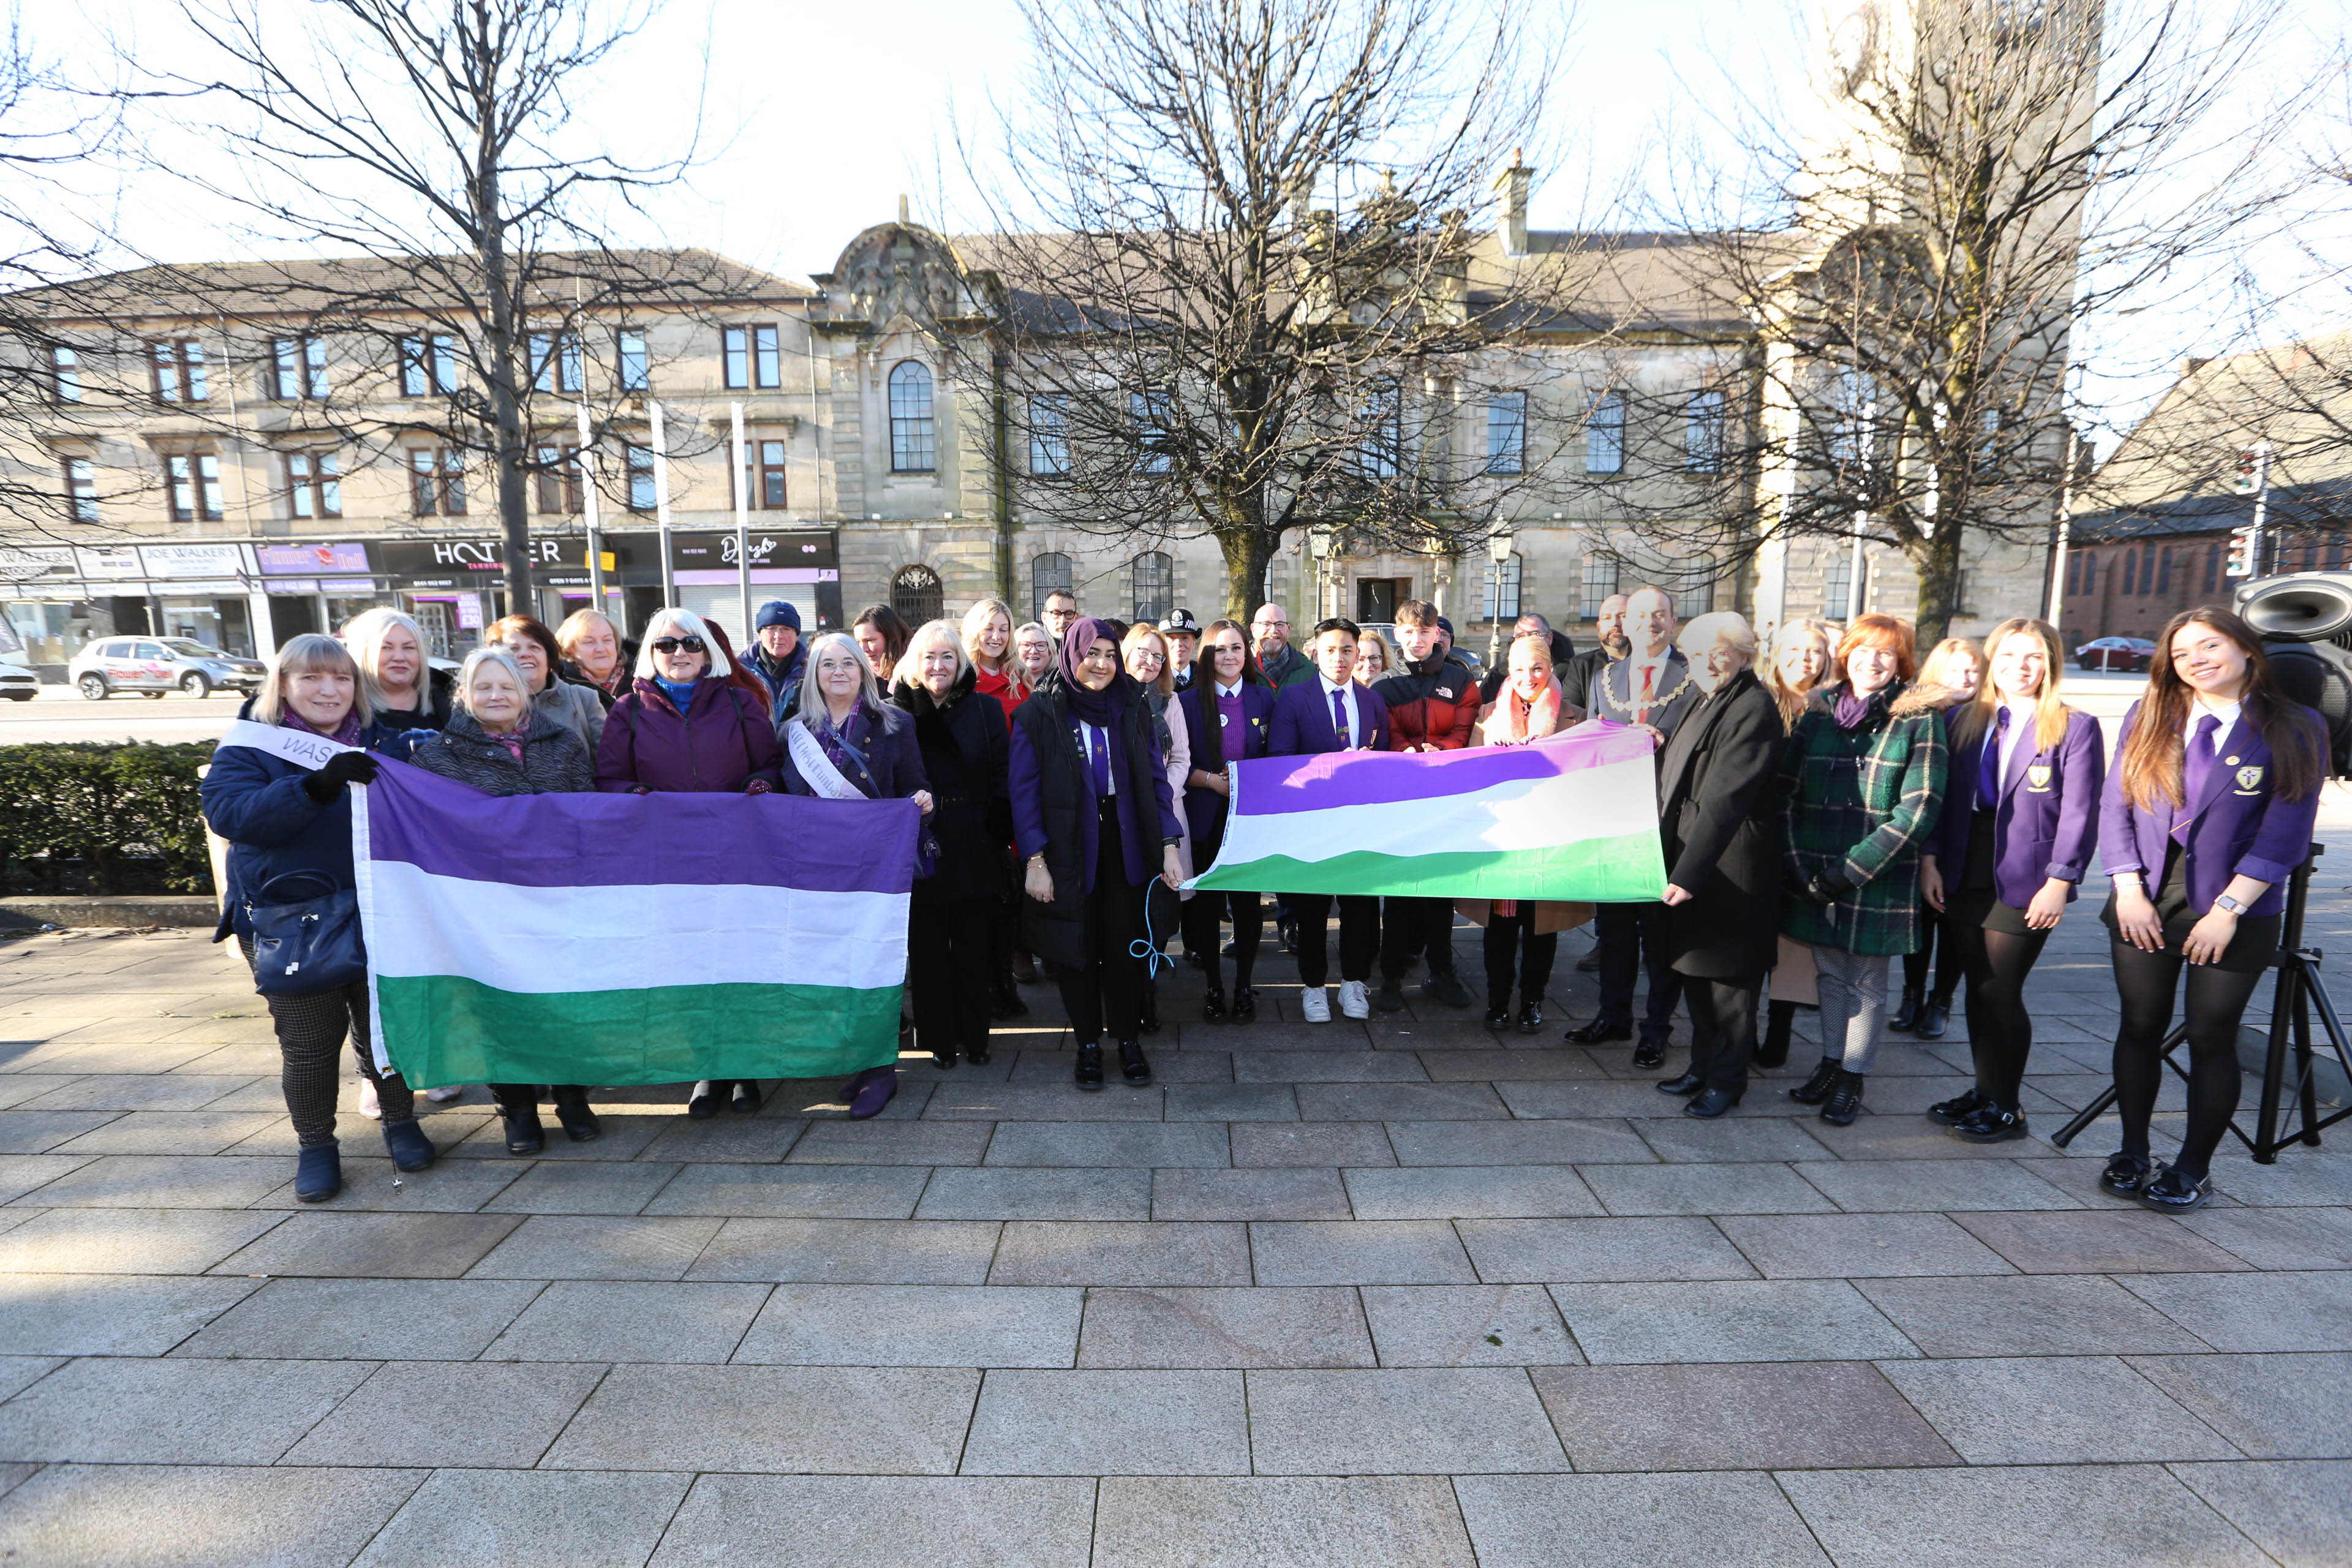 Provost Douglas McAllister was joined by elected members, local residents and school pupils in a flag-raising ceremony to celebrate International Women’s Day.